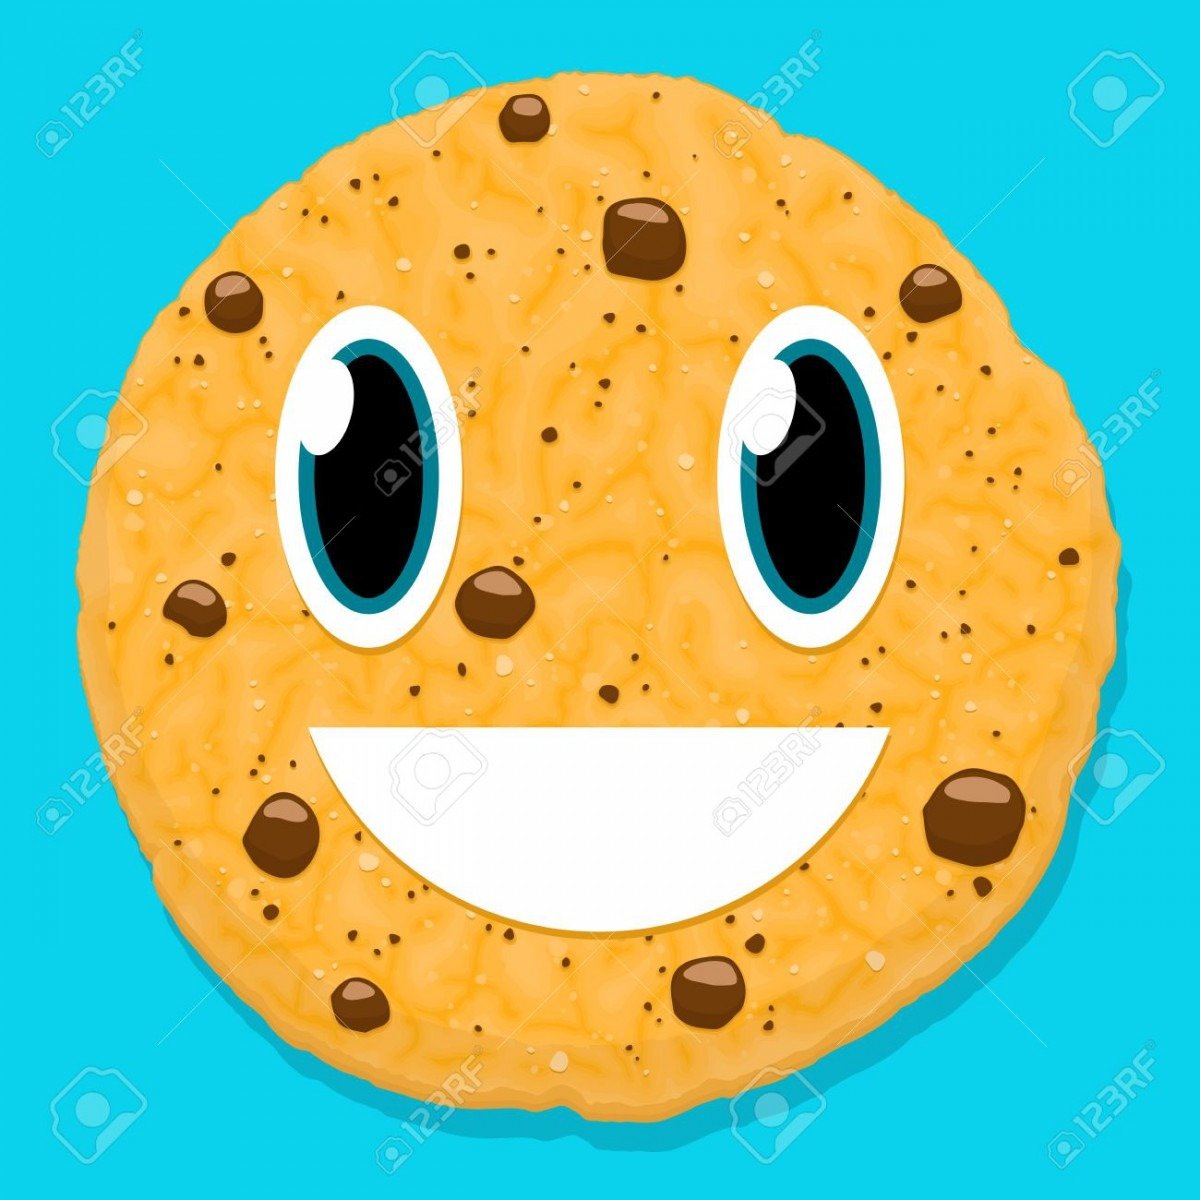 Cute Chocolate Cookie Character With Smiley Face Royalty Free